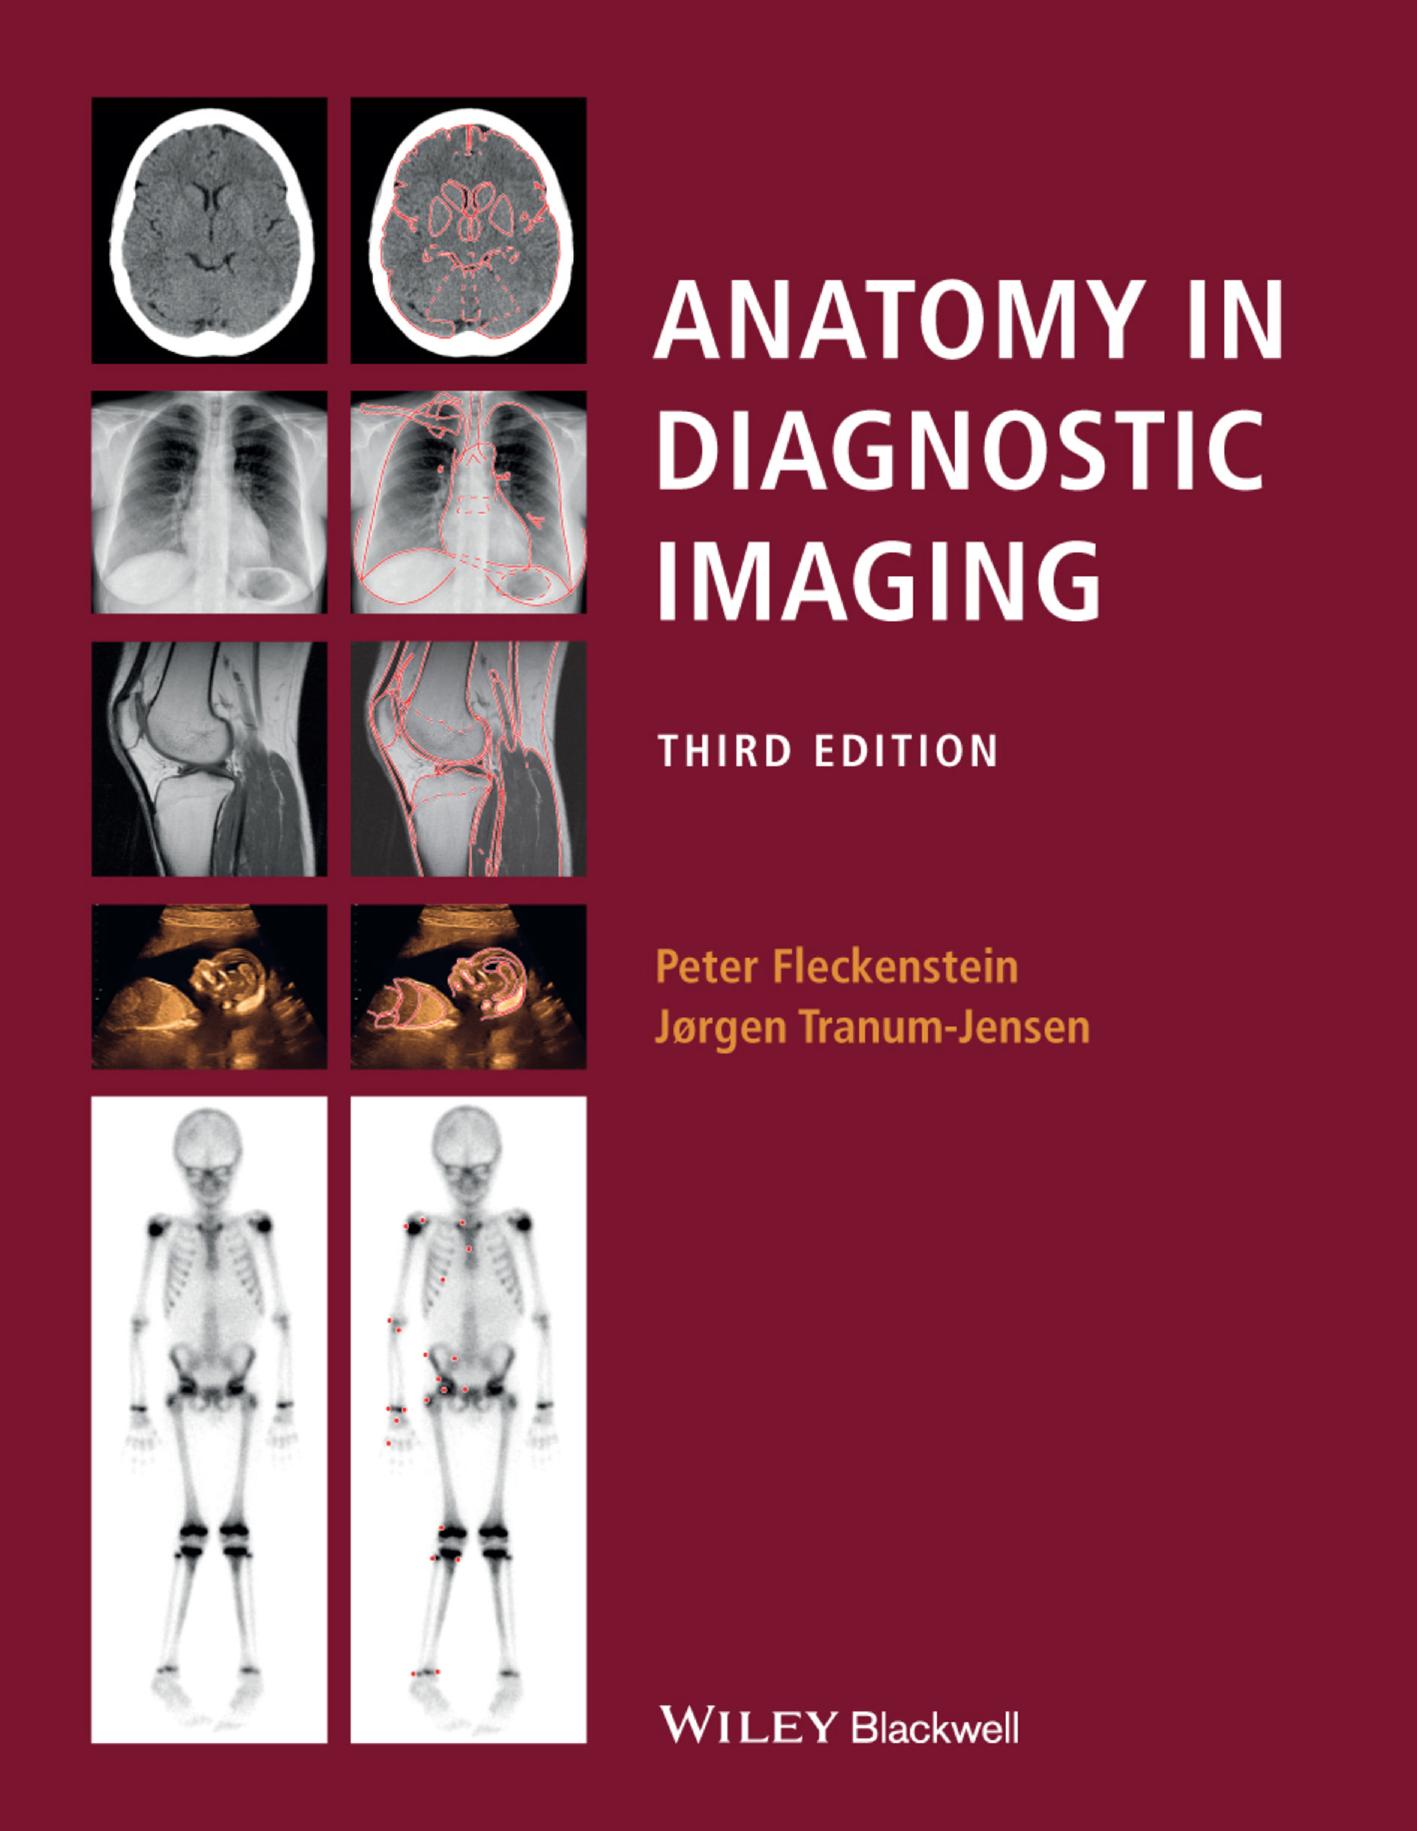 Anatomy in Diagnostic Imaging, 3rd Edition by Fleckenstein, Peter.jpg